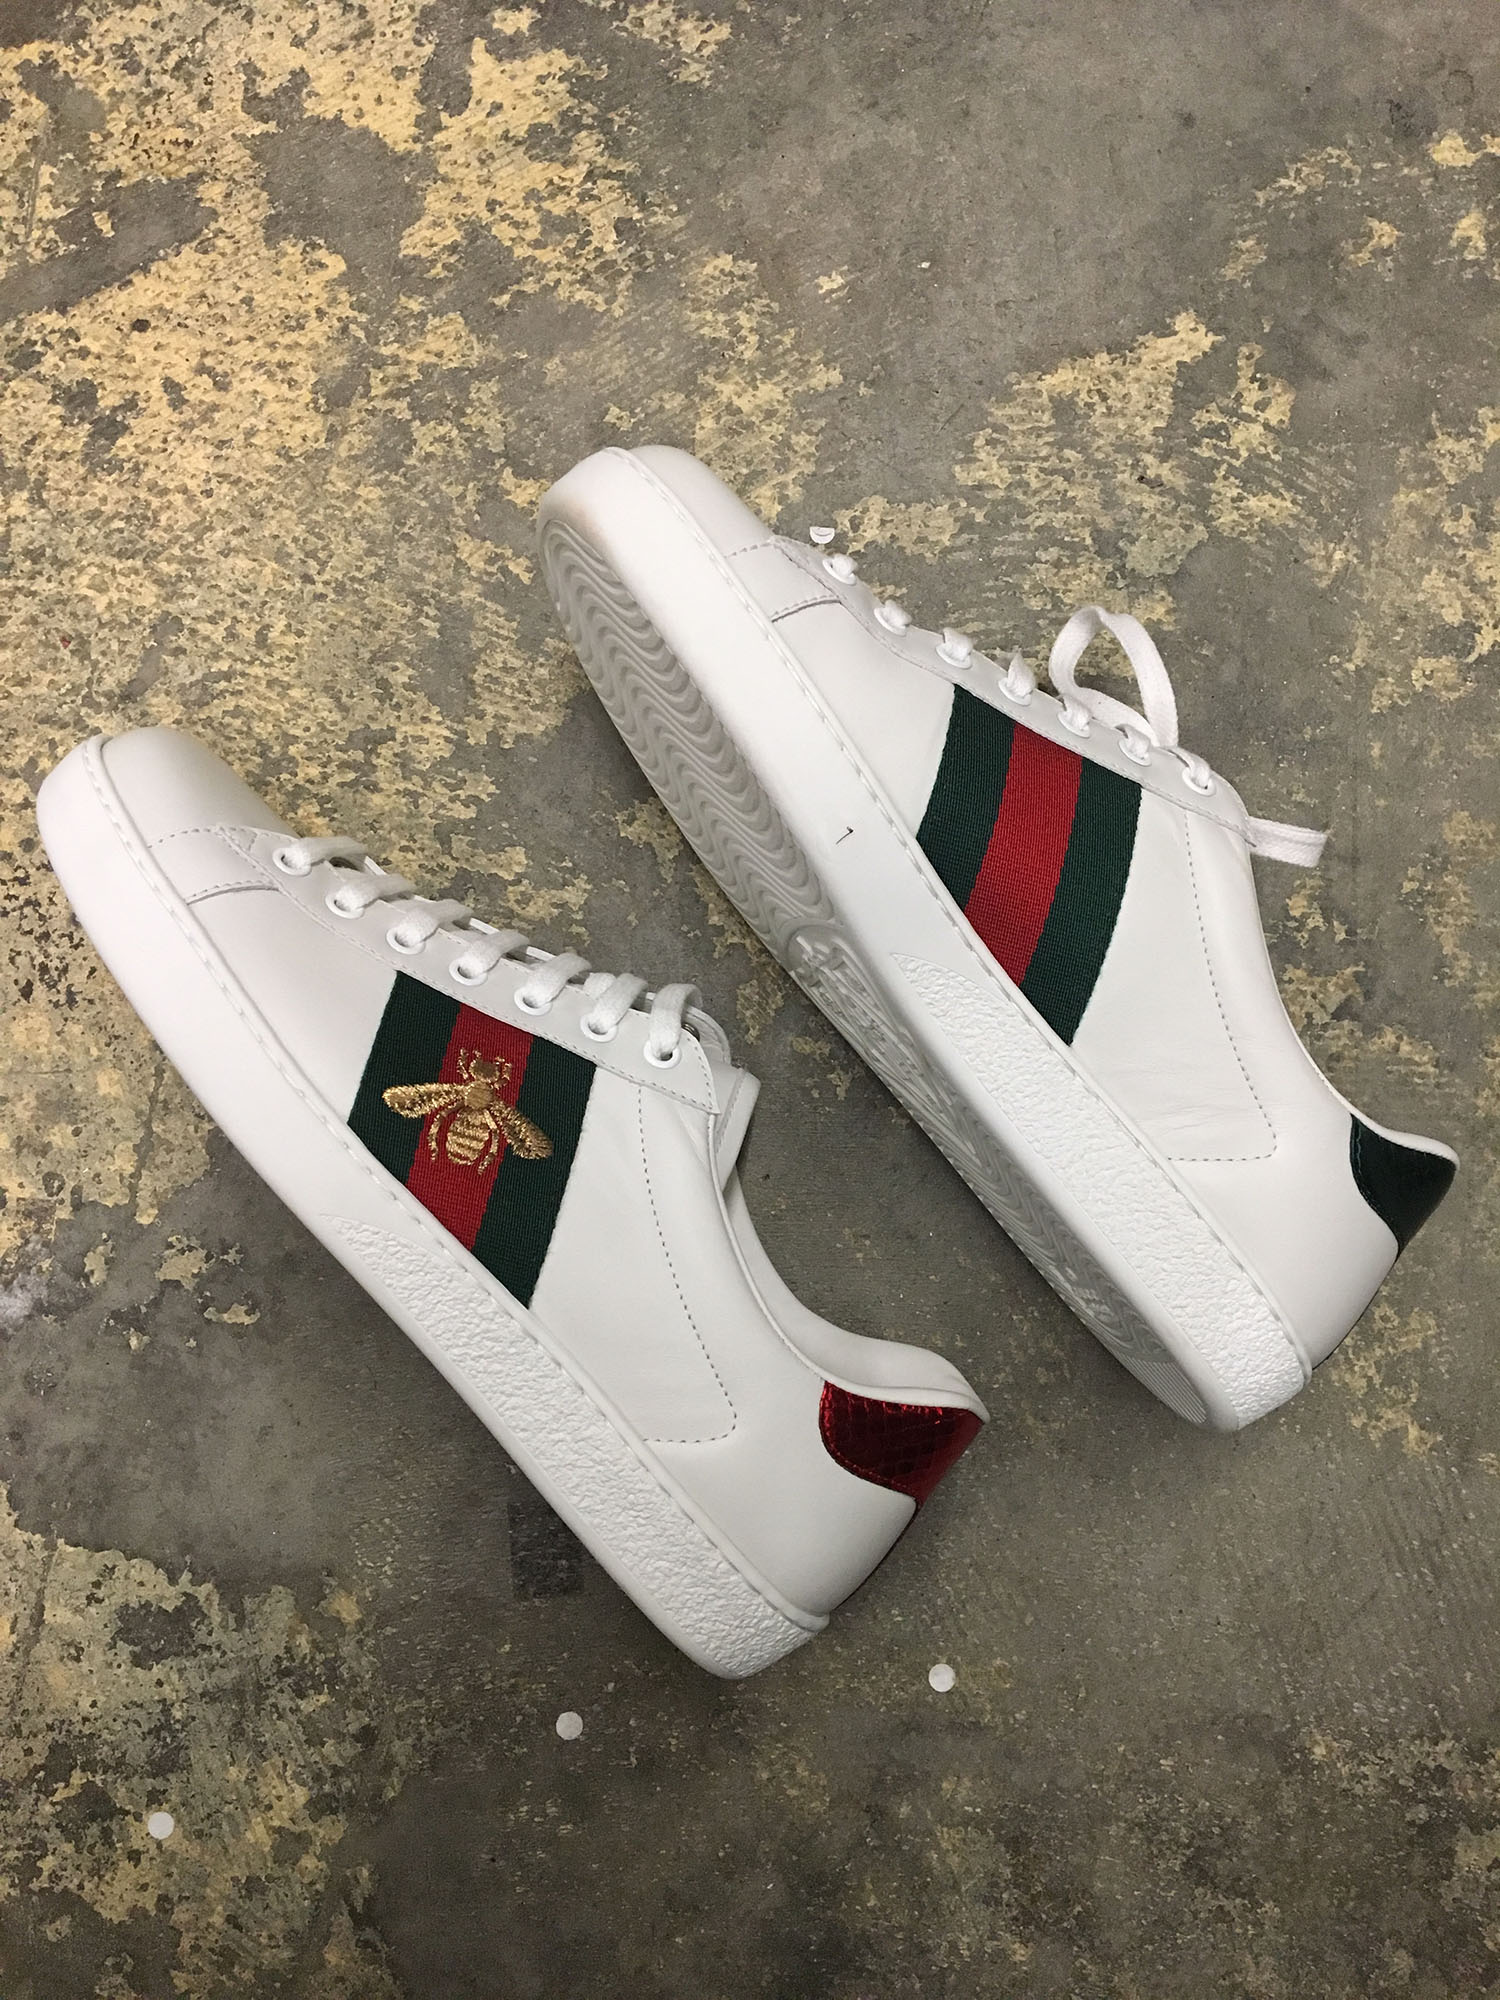 liste bredde angreb The Gucci Ace Bee Sneaker Review: To Buy or Not? - EMPLOOM